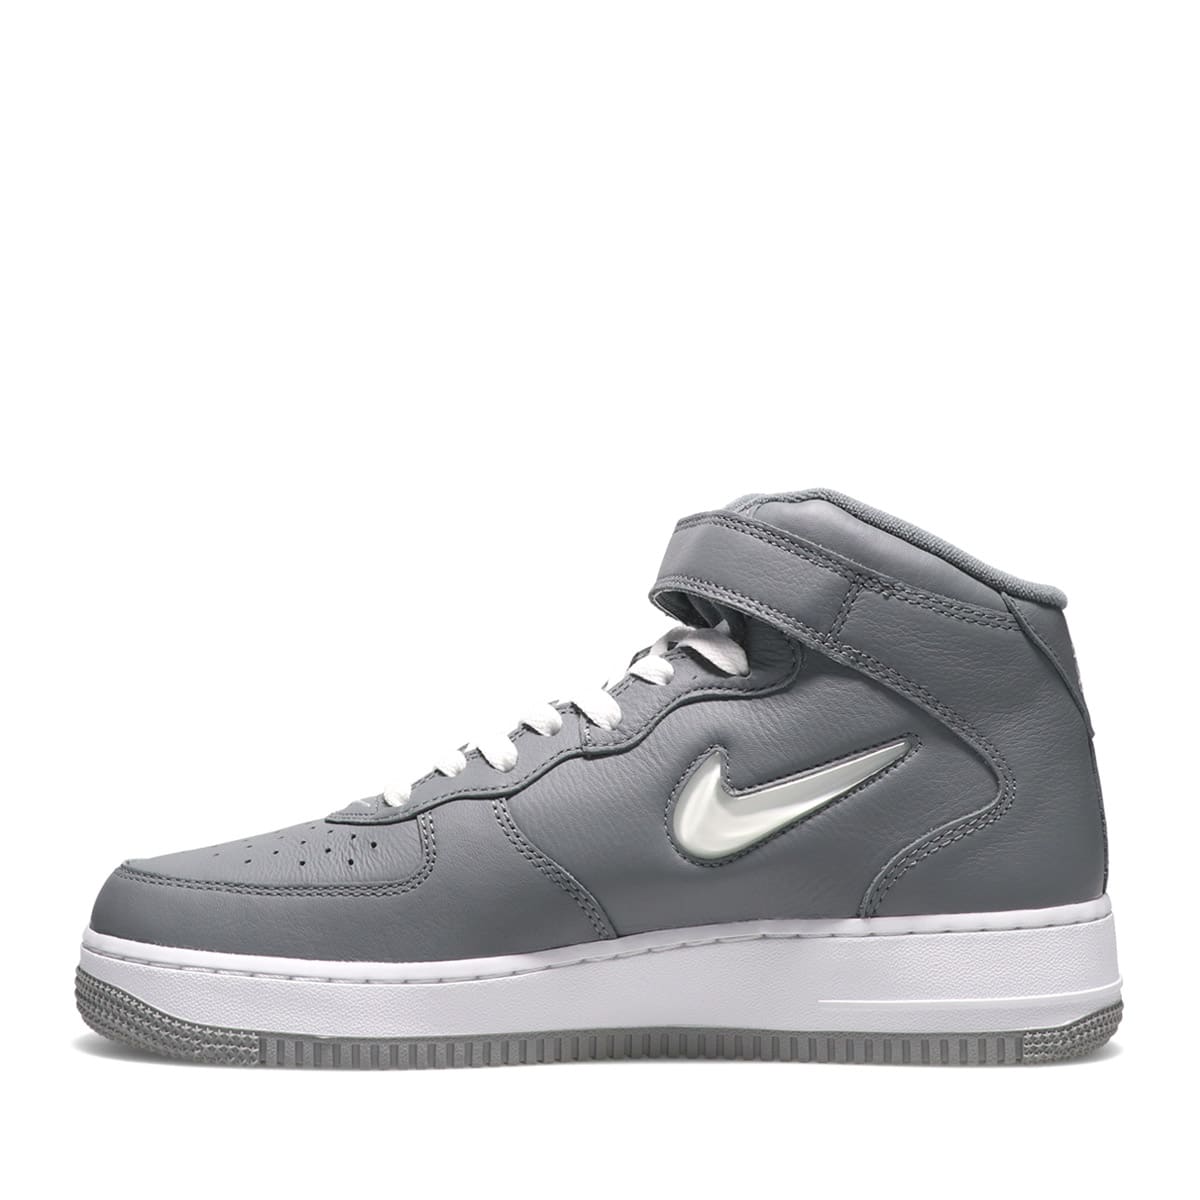 Forest29NIKE AIR FORCE 1 MID QS 29cm 新品